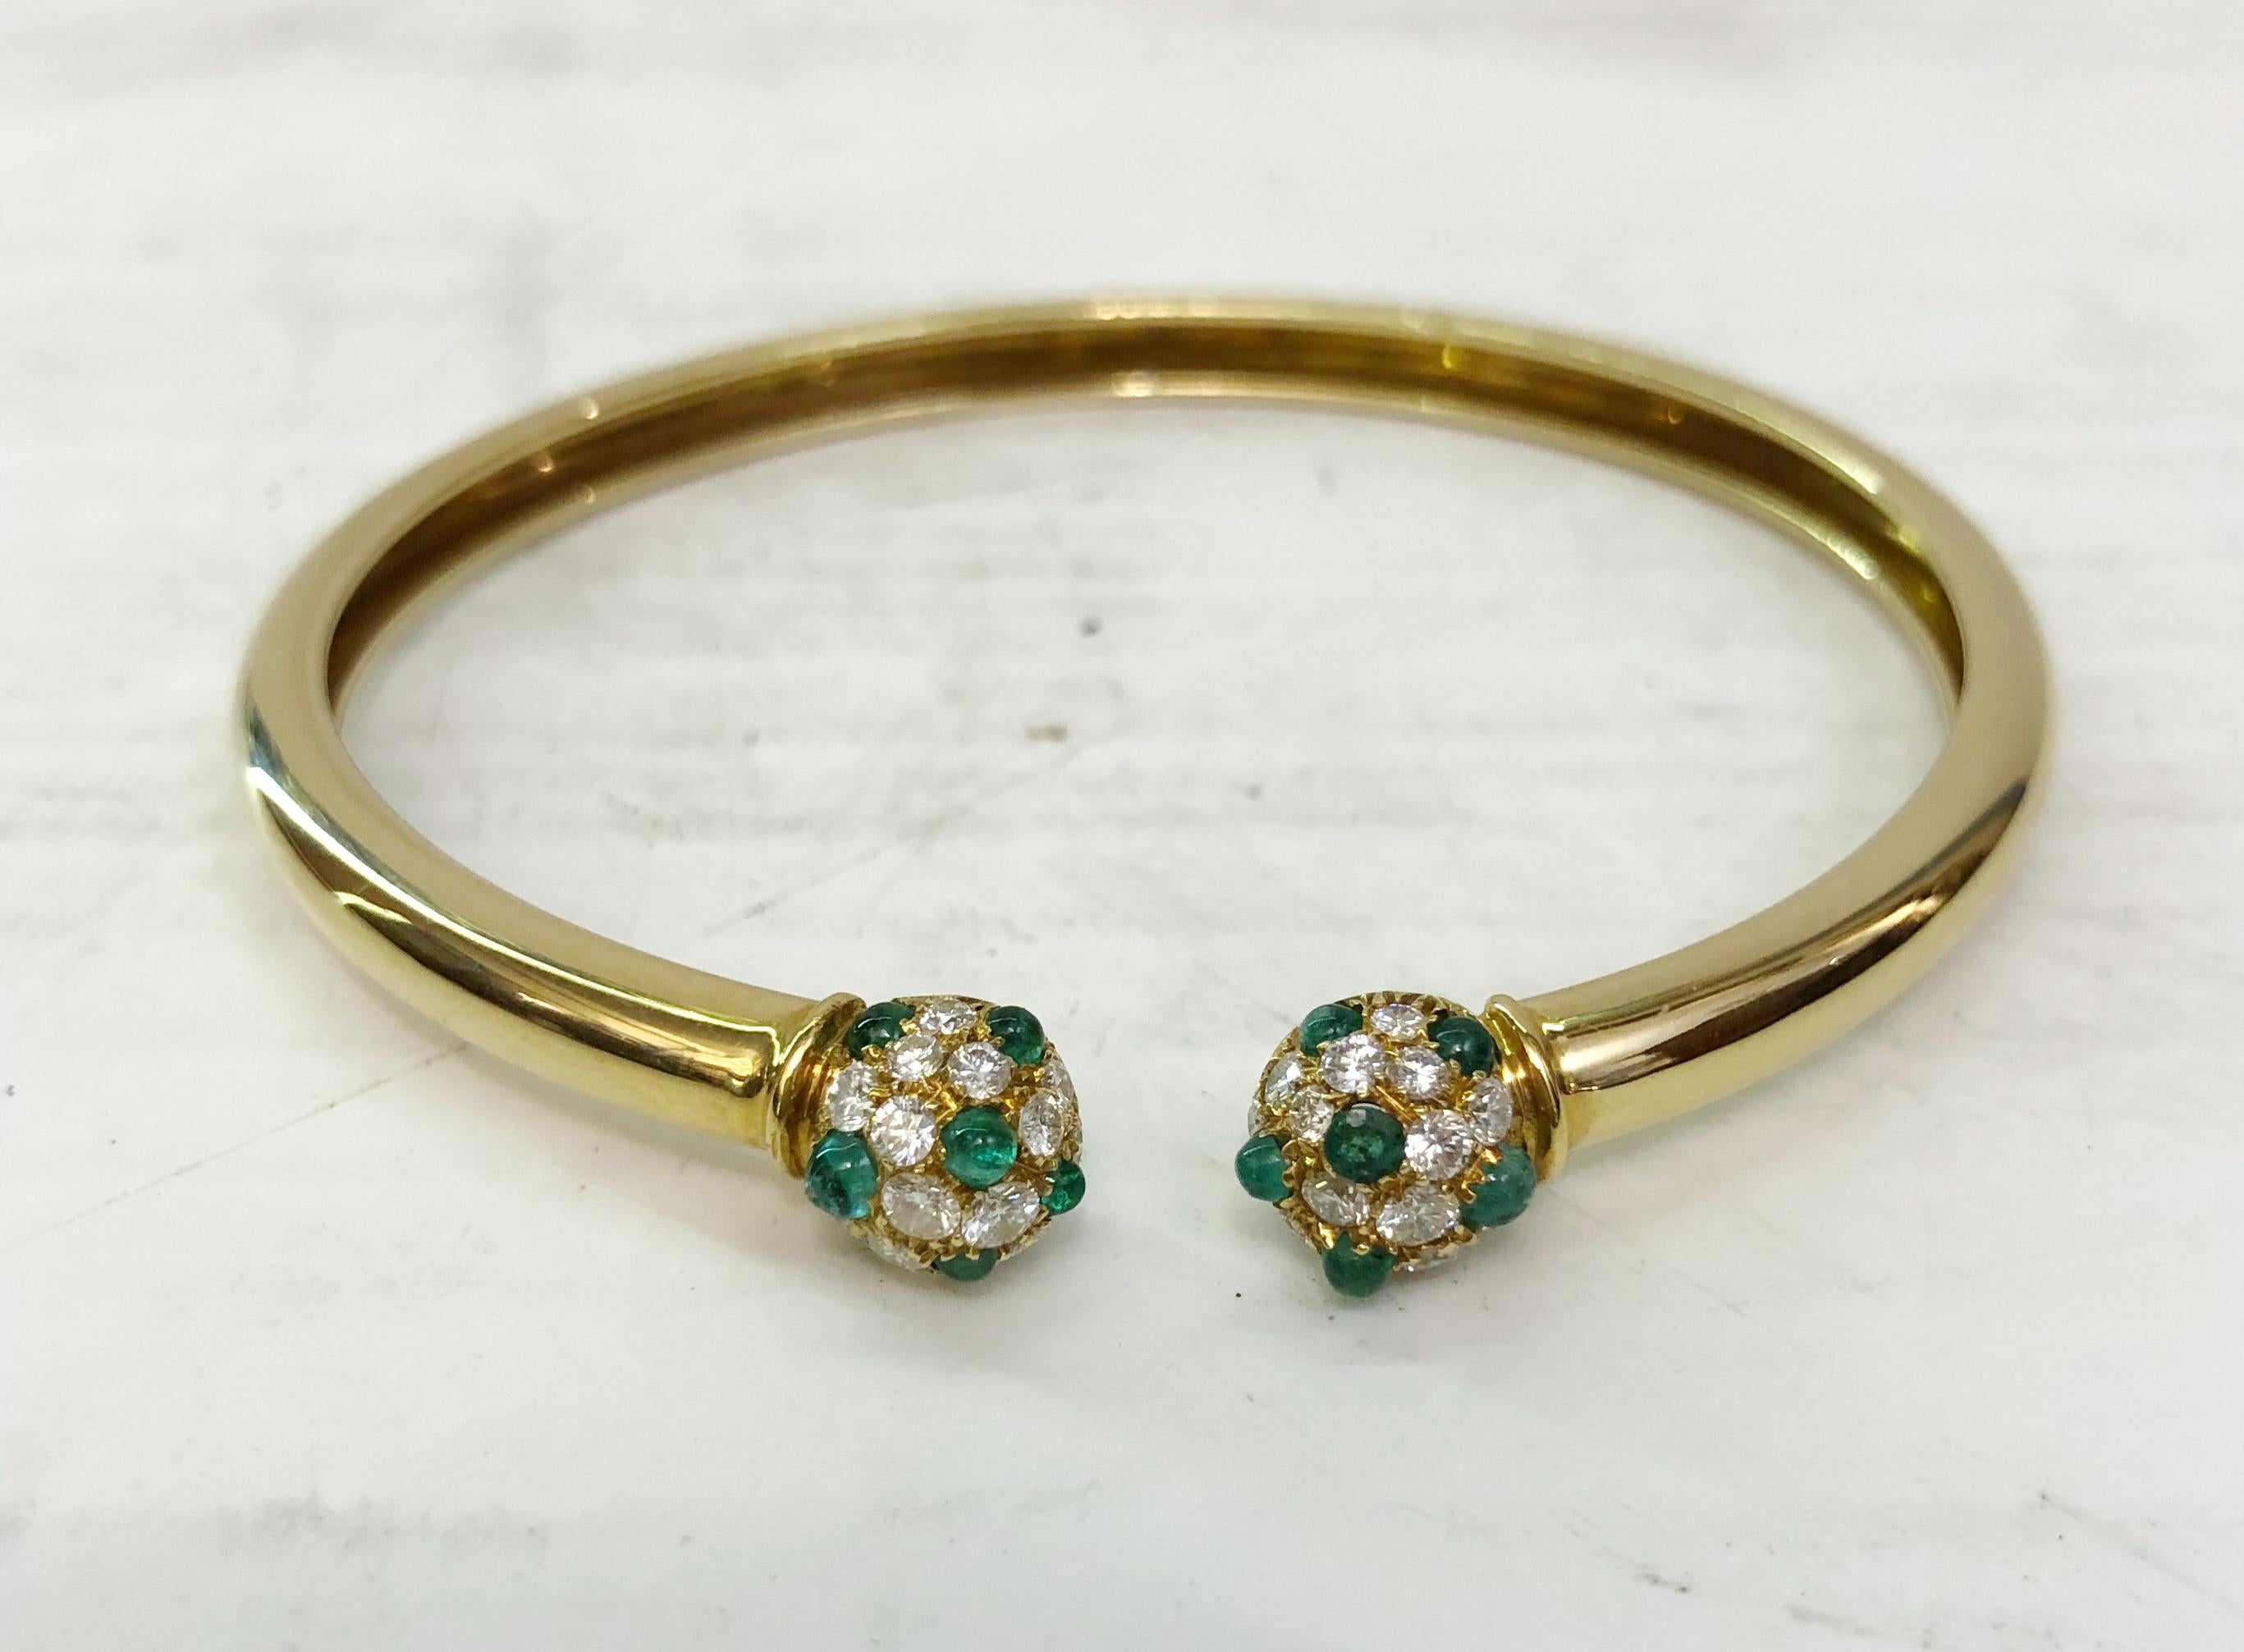 Vintage Italian rigid bracelet with sphere ends of brilliant diamonds for a total of 0.50 carats and cabouchon emeralds / Made in Italy 1970s